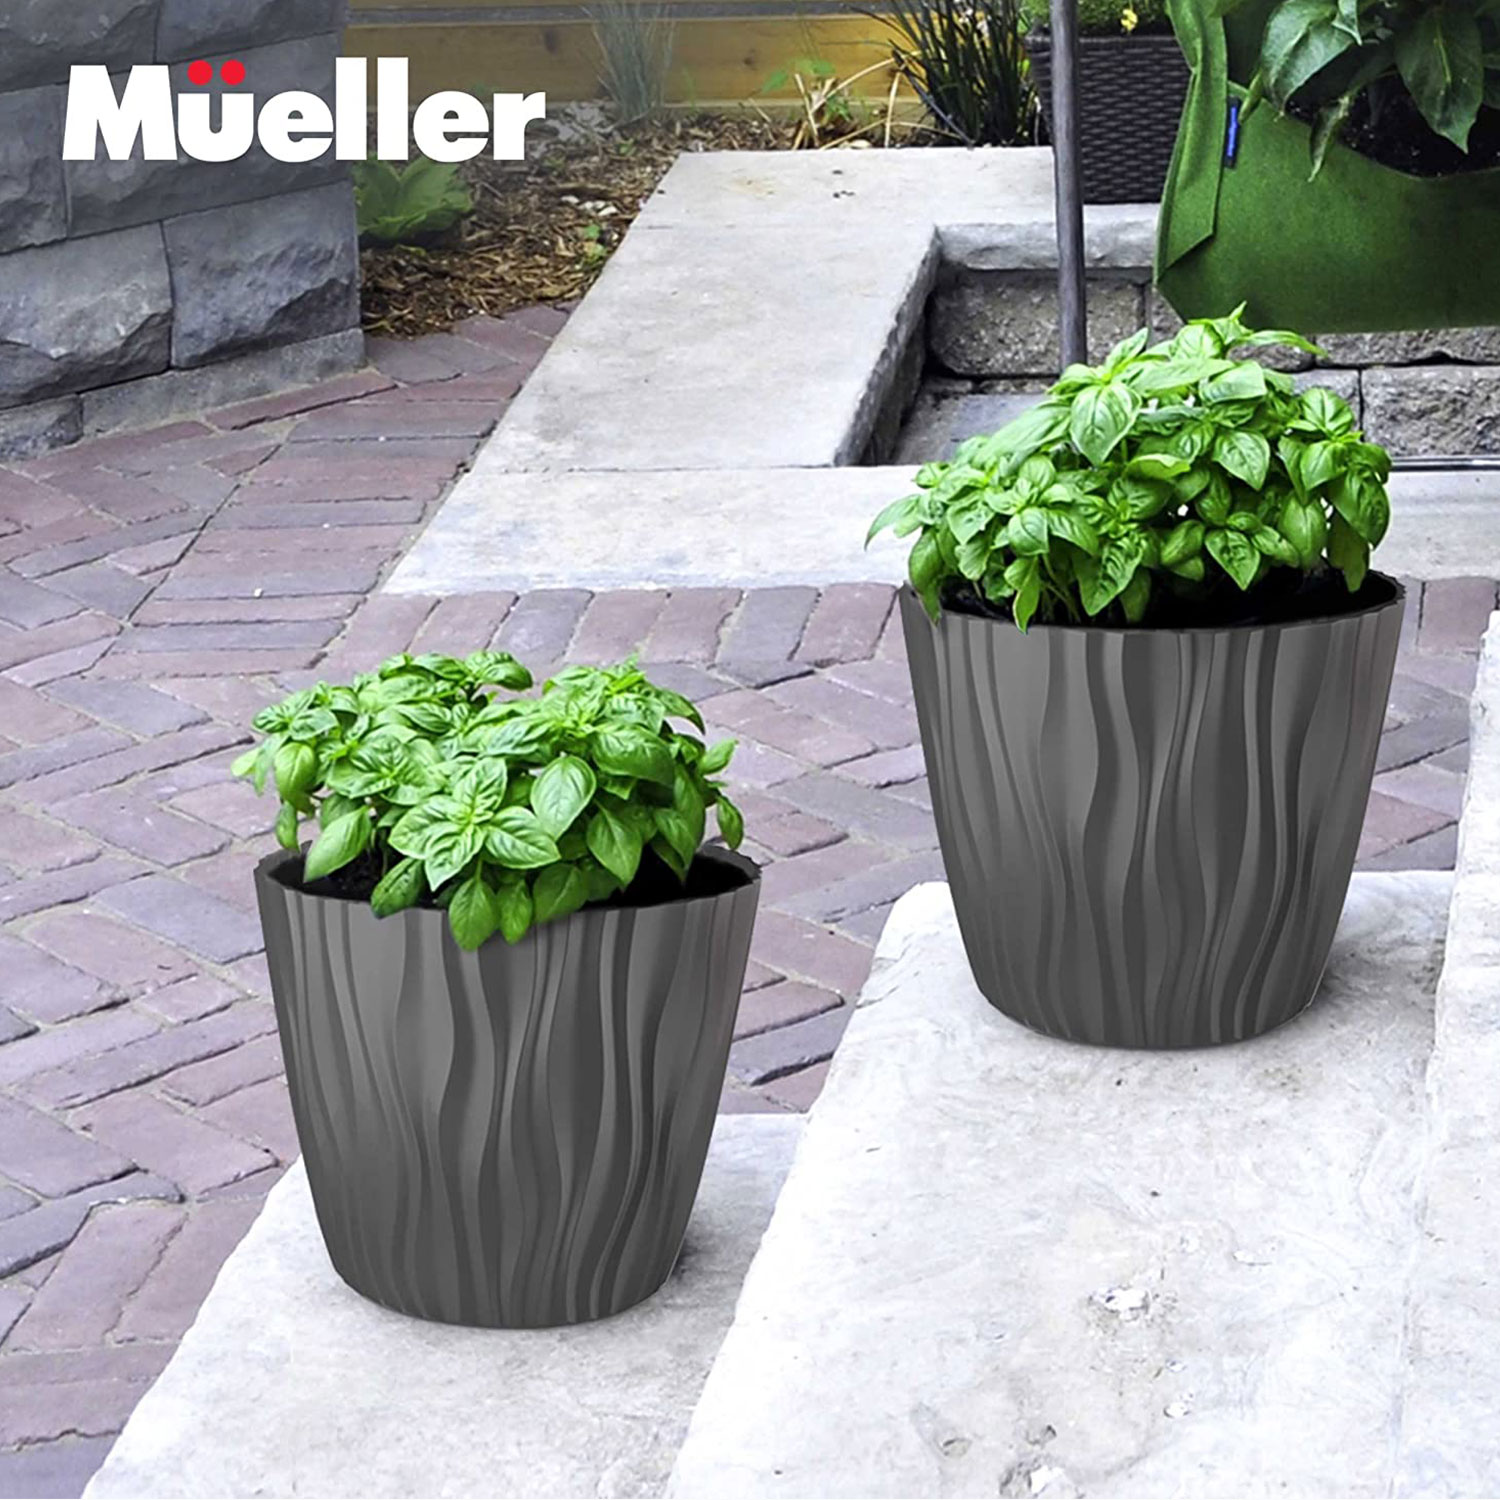 muellerhome_Decorative-Plant-and-Flower-Pots-Small-2-Piece-Gray-Set-7